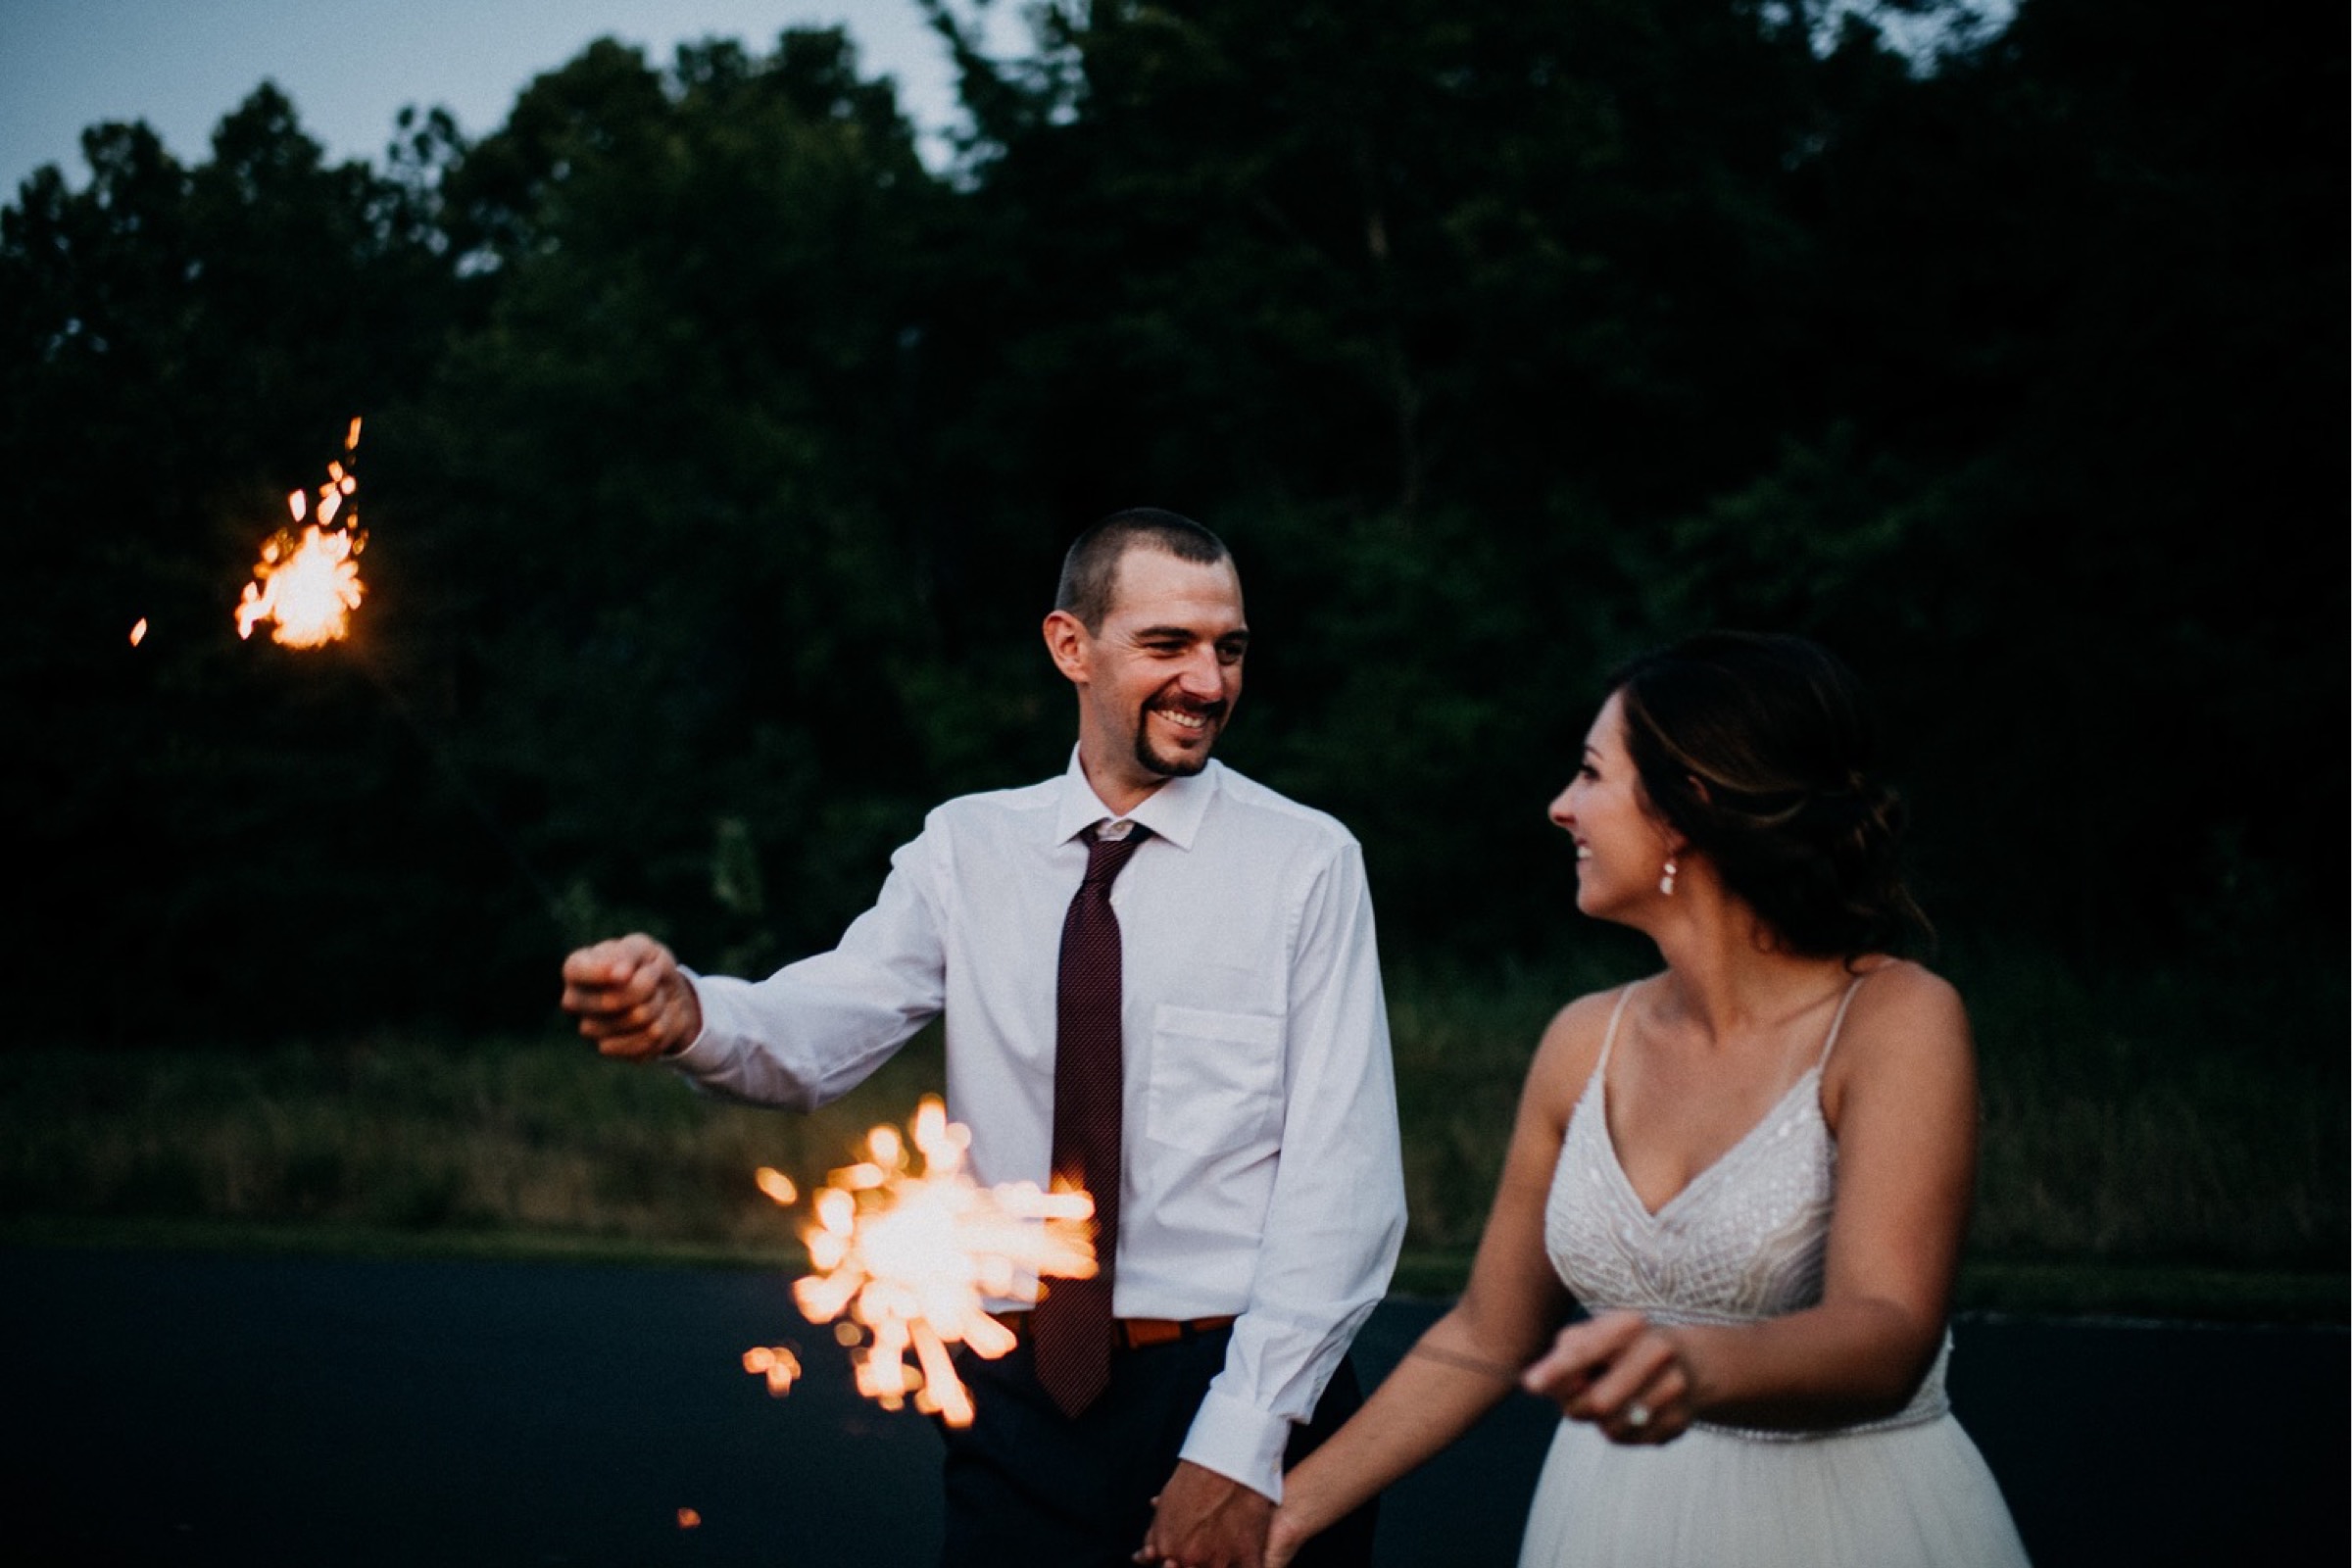 a bride and groom play with sparklers during a sunset portrait portion of the wedding day timeline 